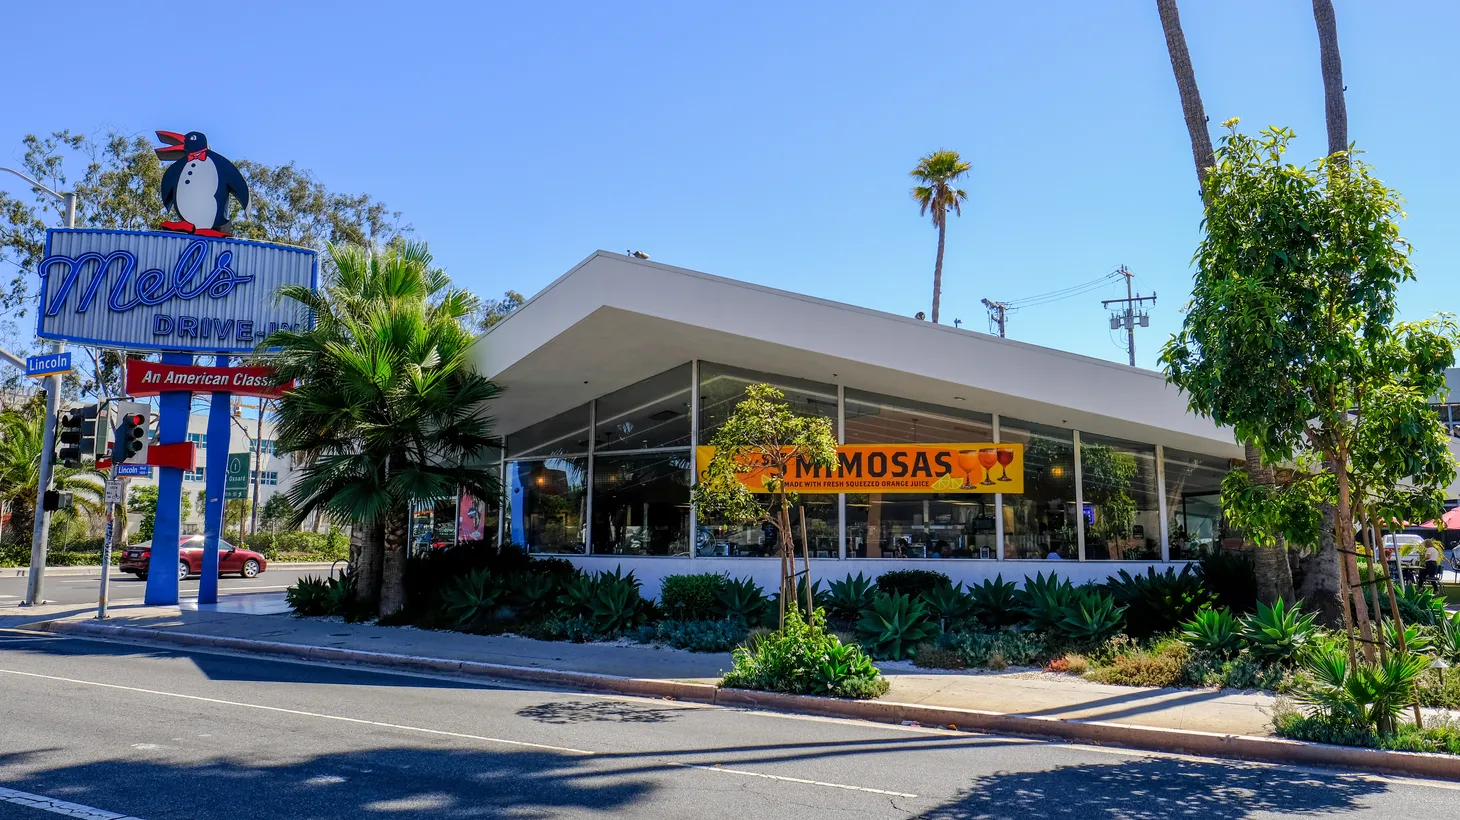 Mel’s Drive-in Restaurant is located on Lincoln Blvd., at the corner of Olympic Blvd. “These [Googie-style] buildings were made for that modern lifestyle. They grabbed your attention as you drove down Lincoln Boulevard or Ventura Boulevard at 30-40 miles an hour. … You knew exactly what they were through the plate glass windows. You can see that there were people enjoying the restaurant,” says co-author Alan Hess.